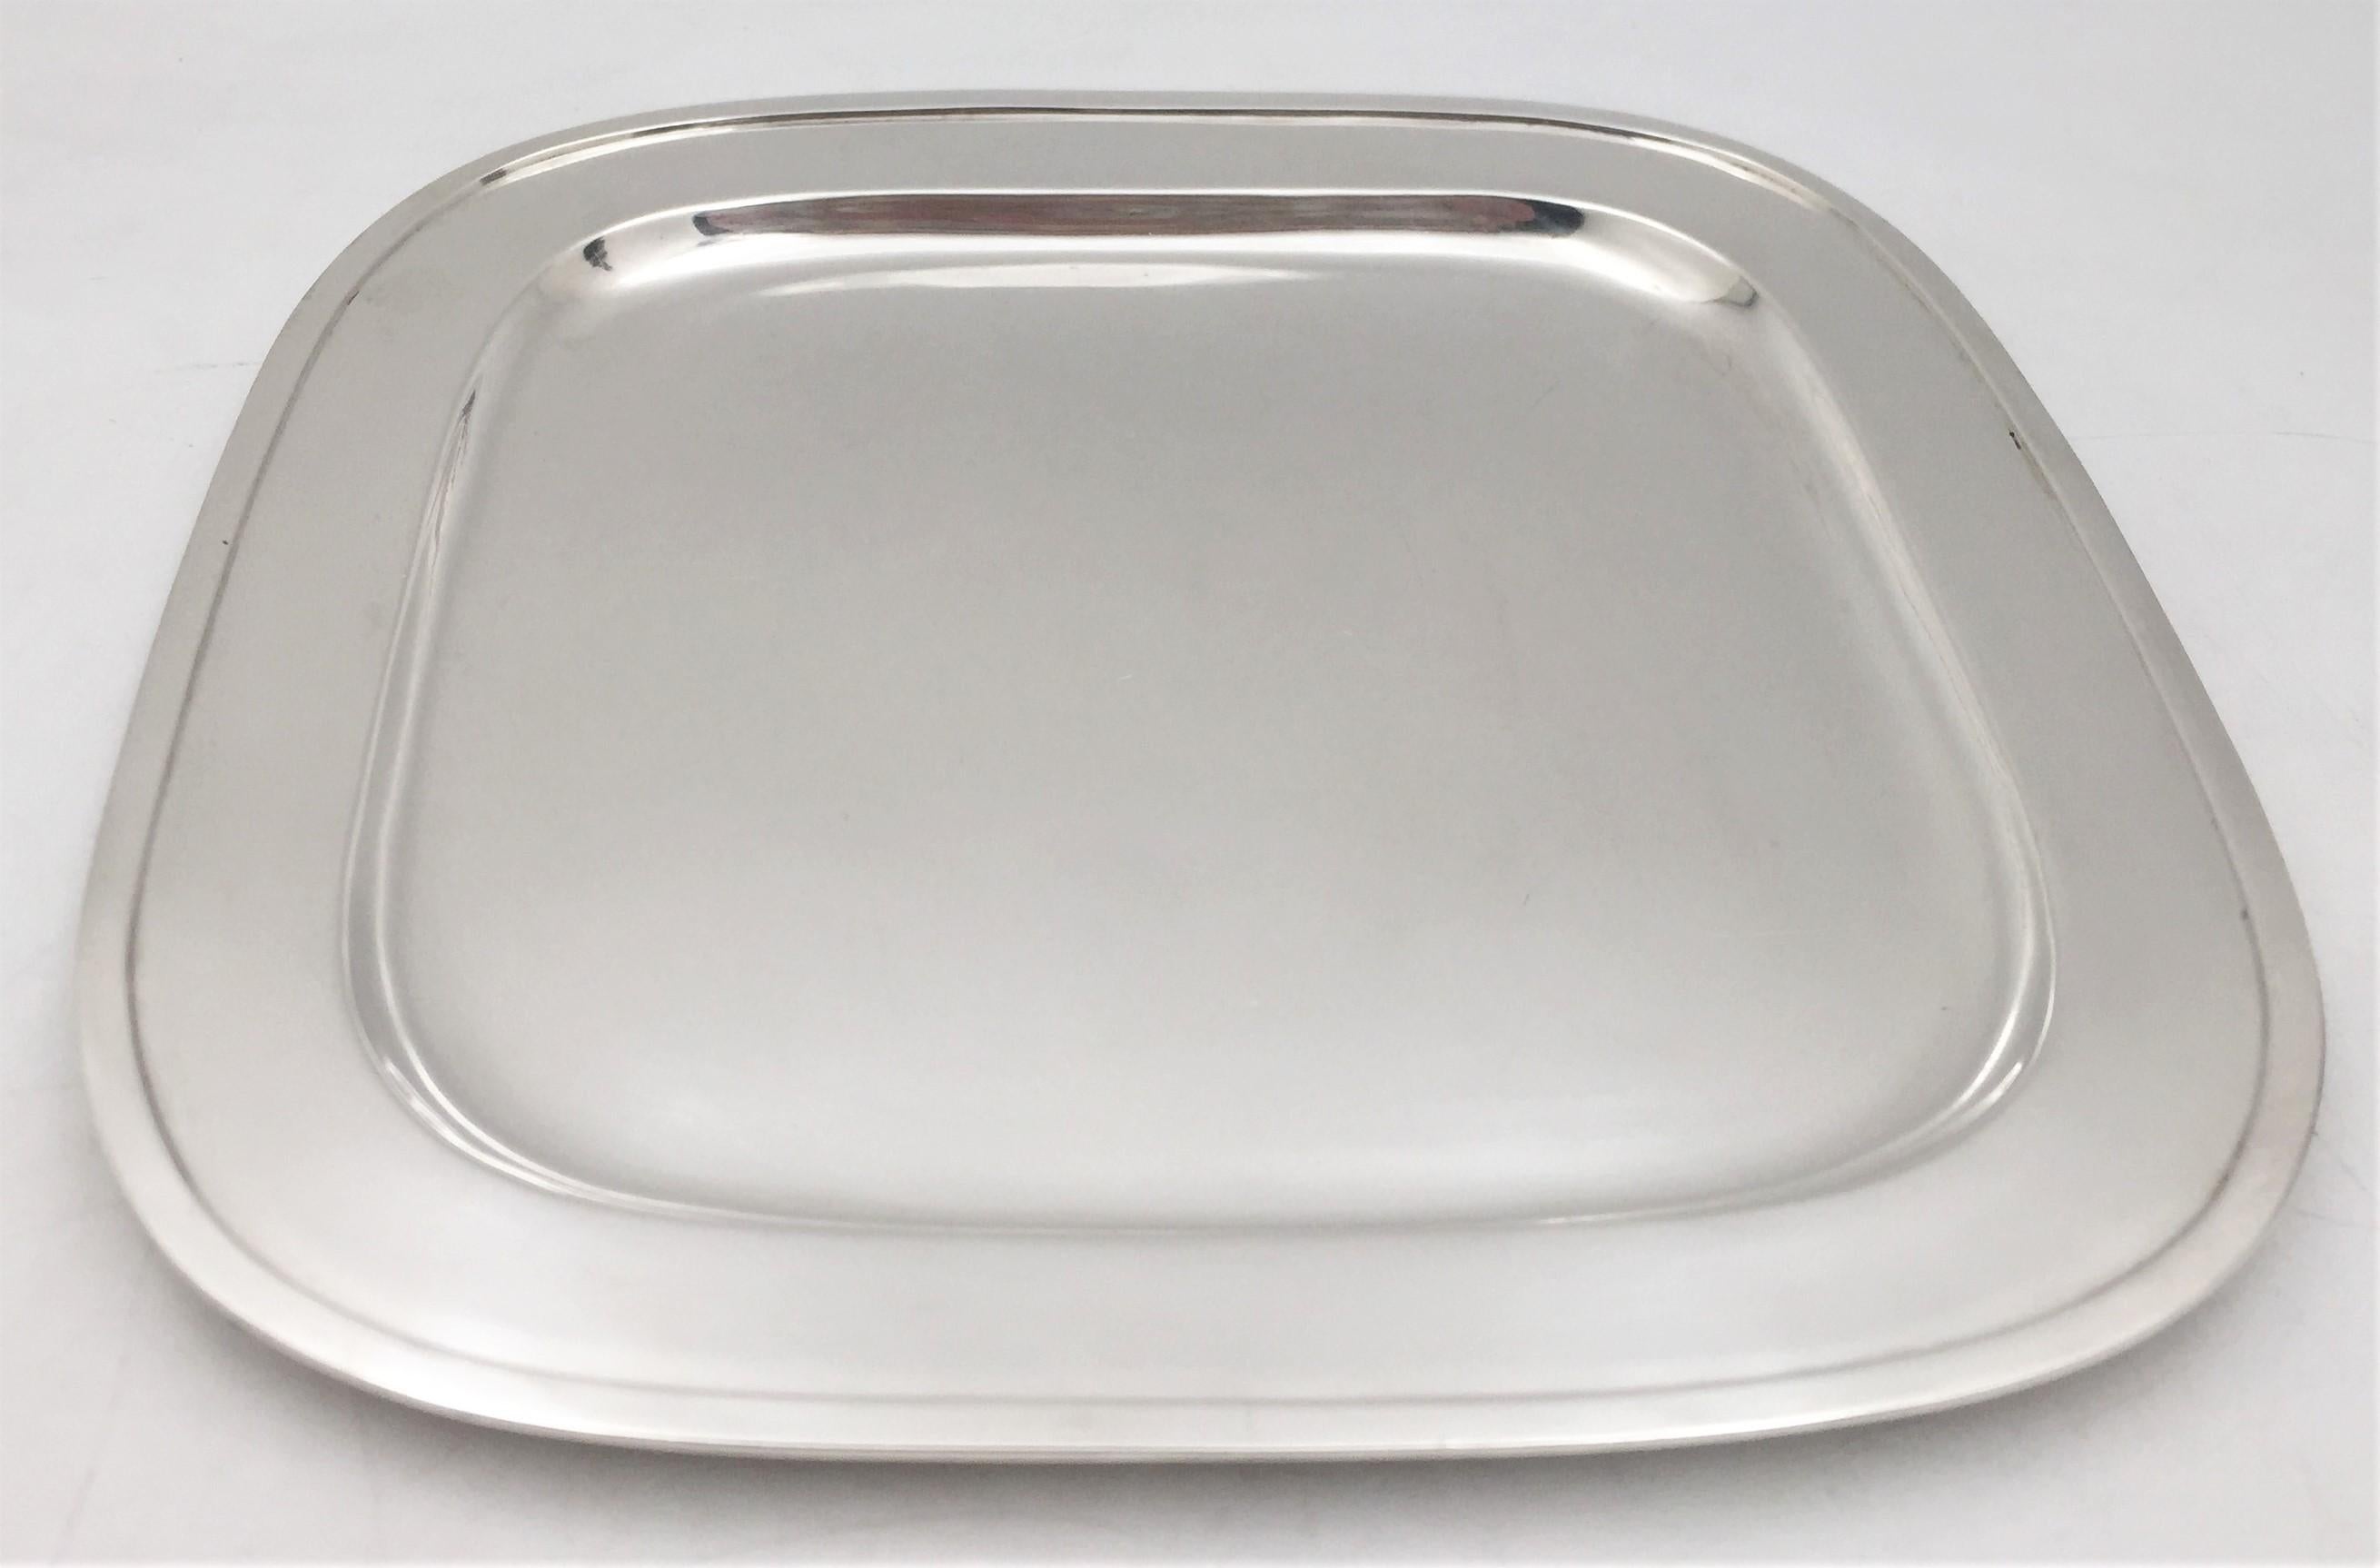 Georg Jensen, sterling silver bar tray in Mid-Century Modern style with beautiful geometric design, measuring 11'' by 11'' by 1/3'' in height, weighing 21.9 troy ounces, and bearing hallmarks as shown. 

Danish silversmith George Jensen set up his